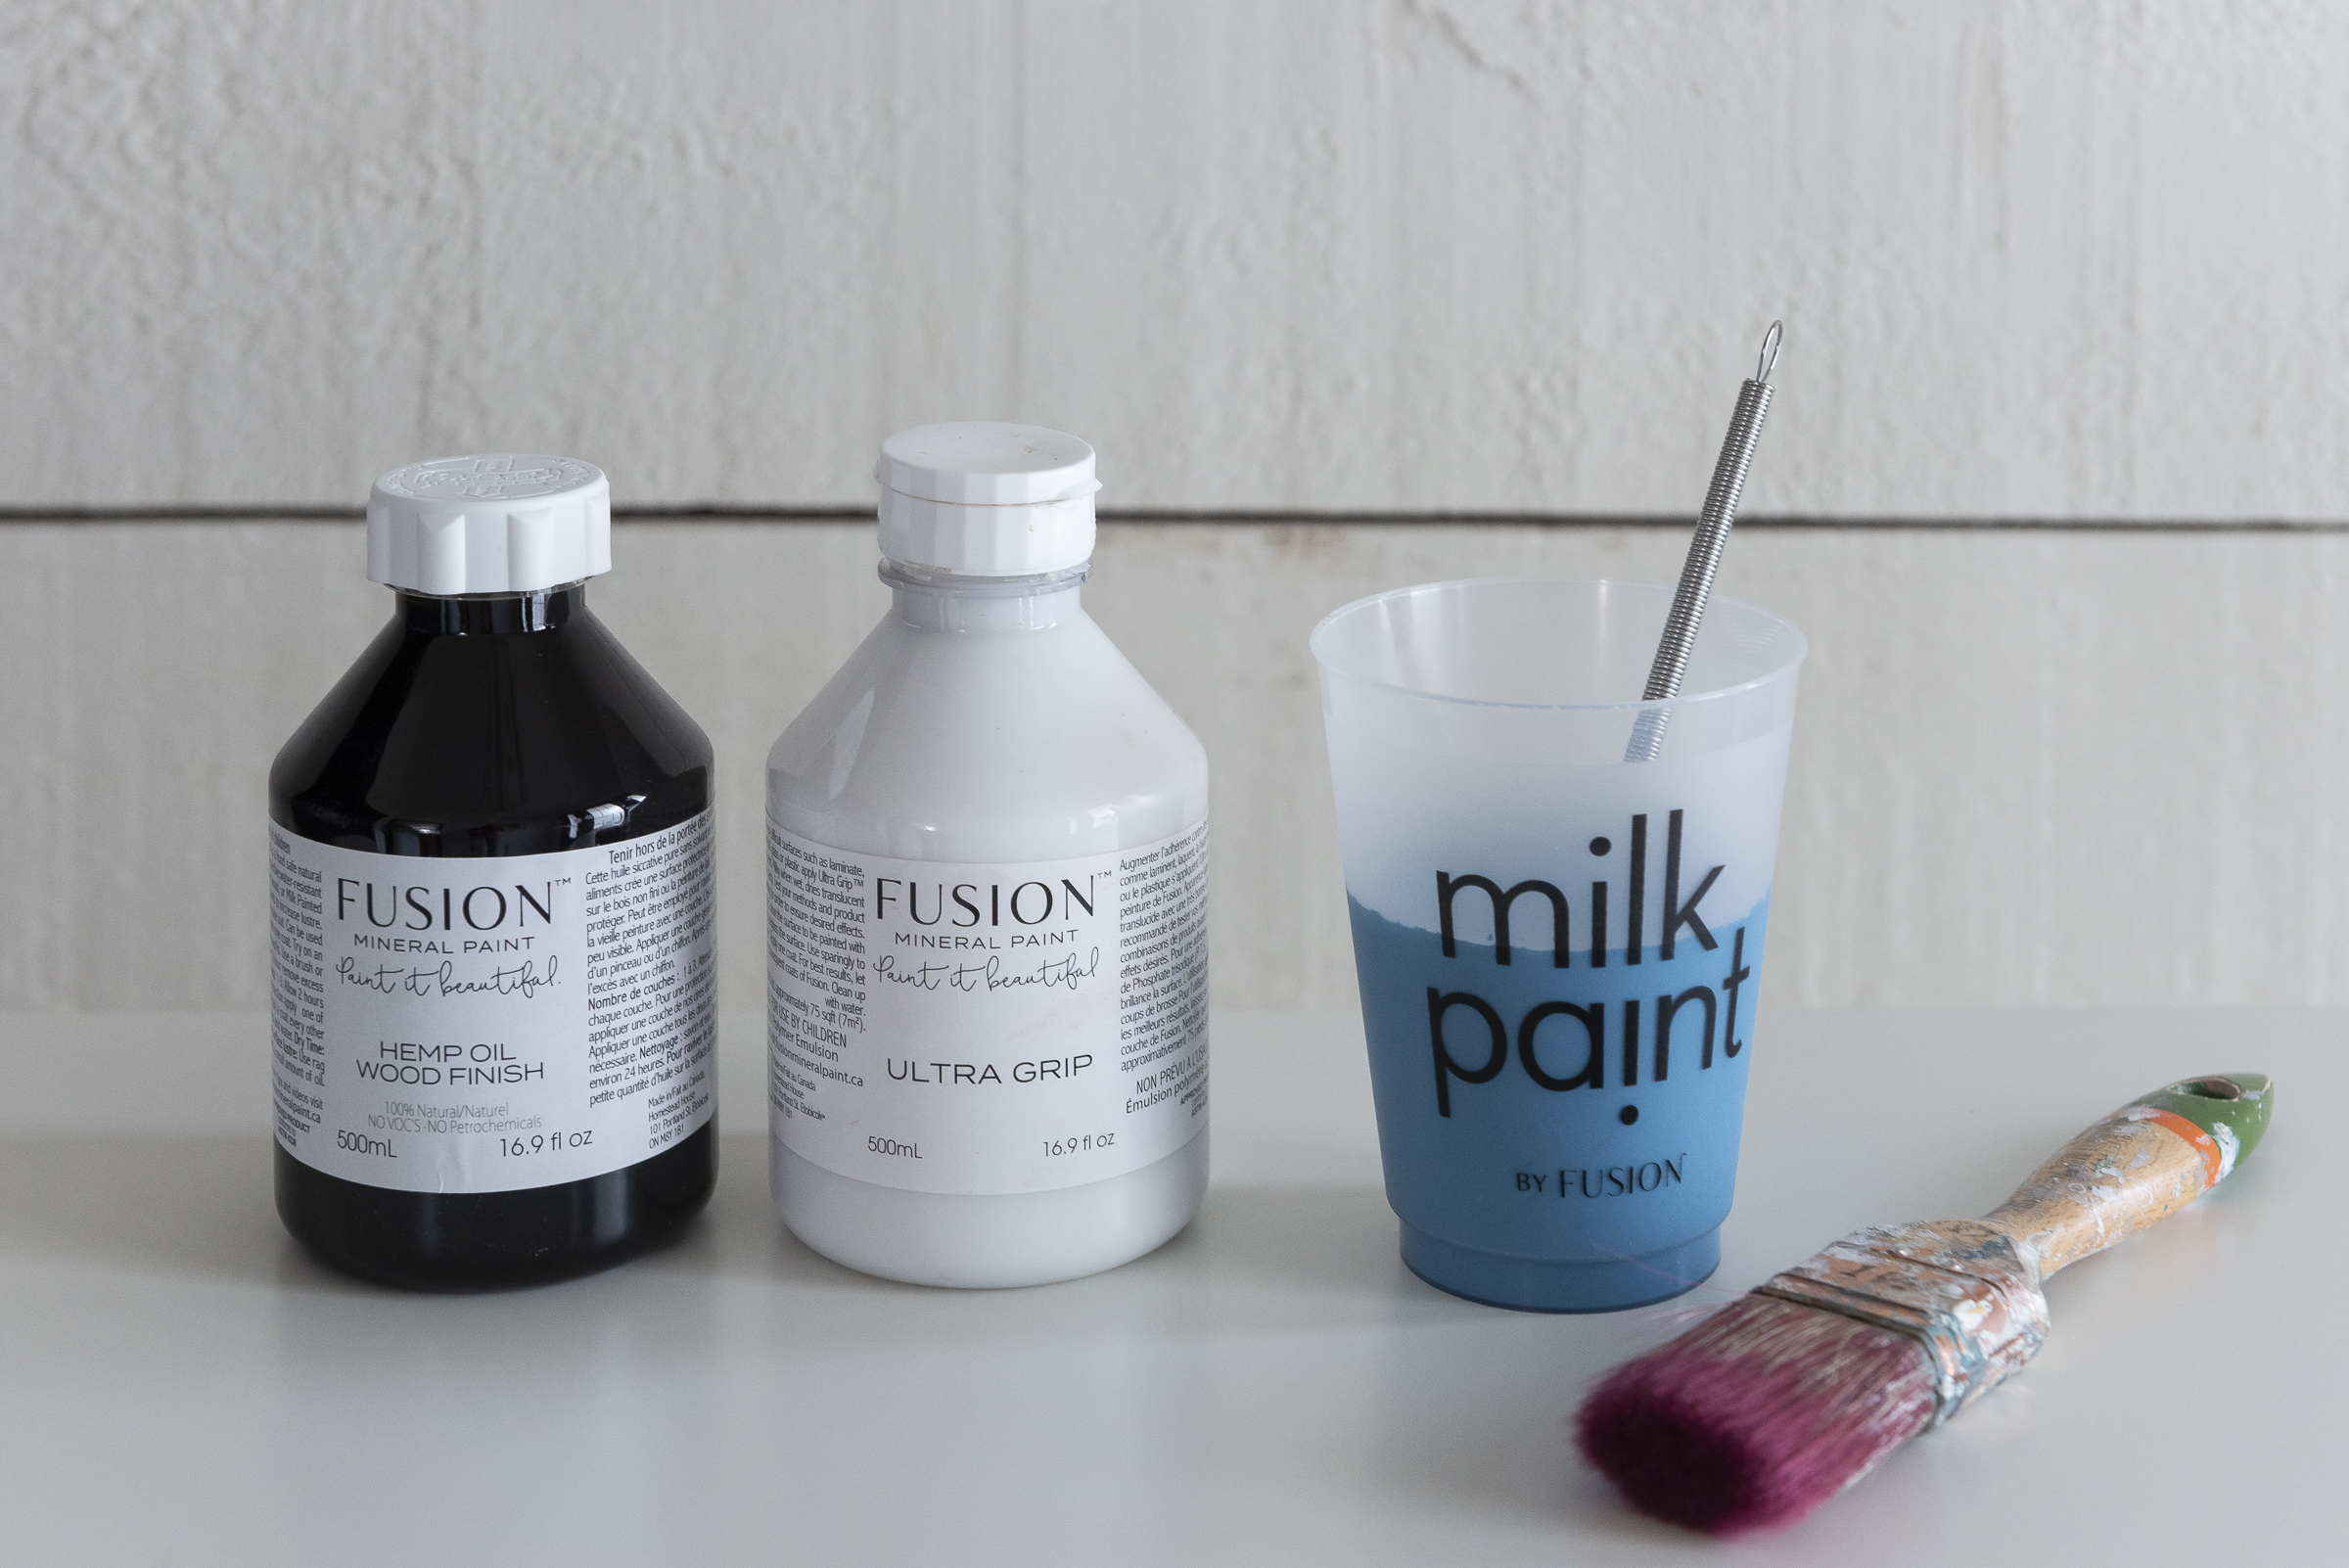 POPULAR FUSION MINERAL PAINT COLORS